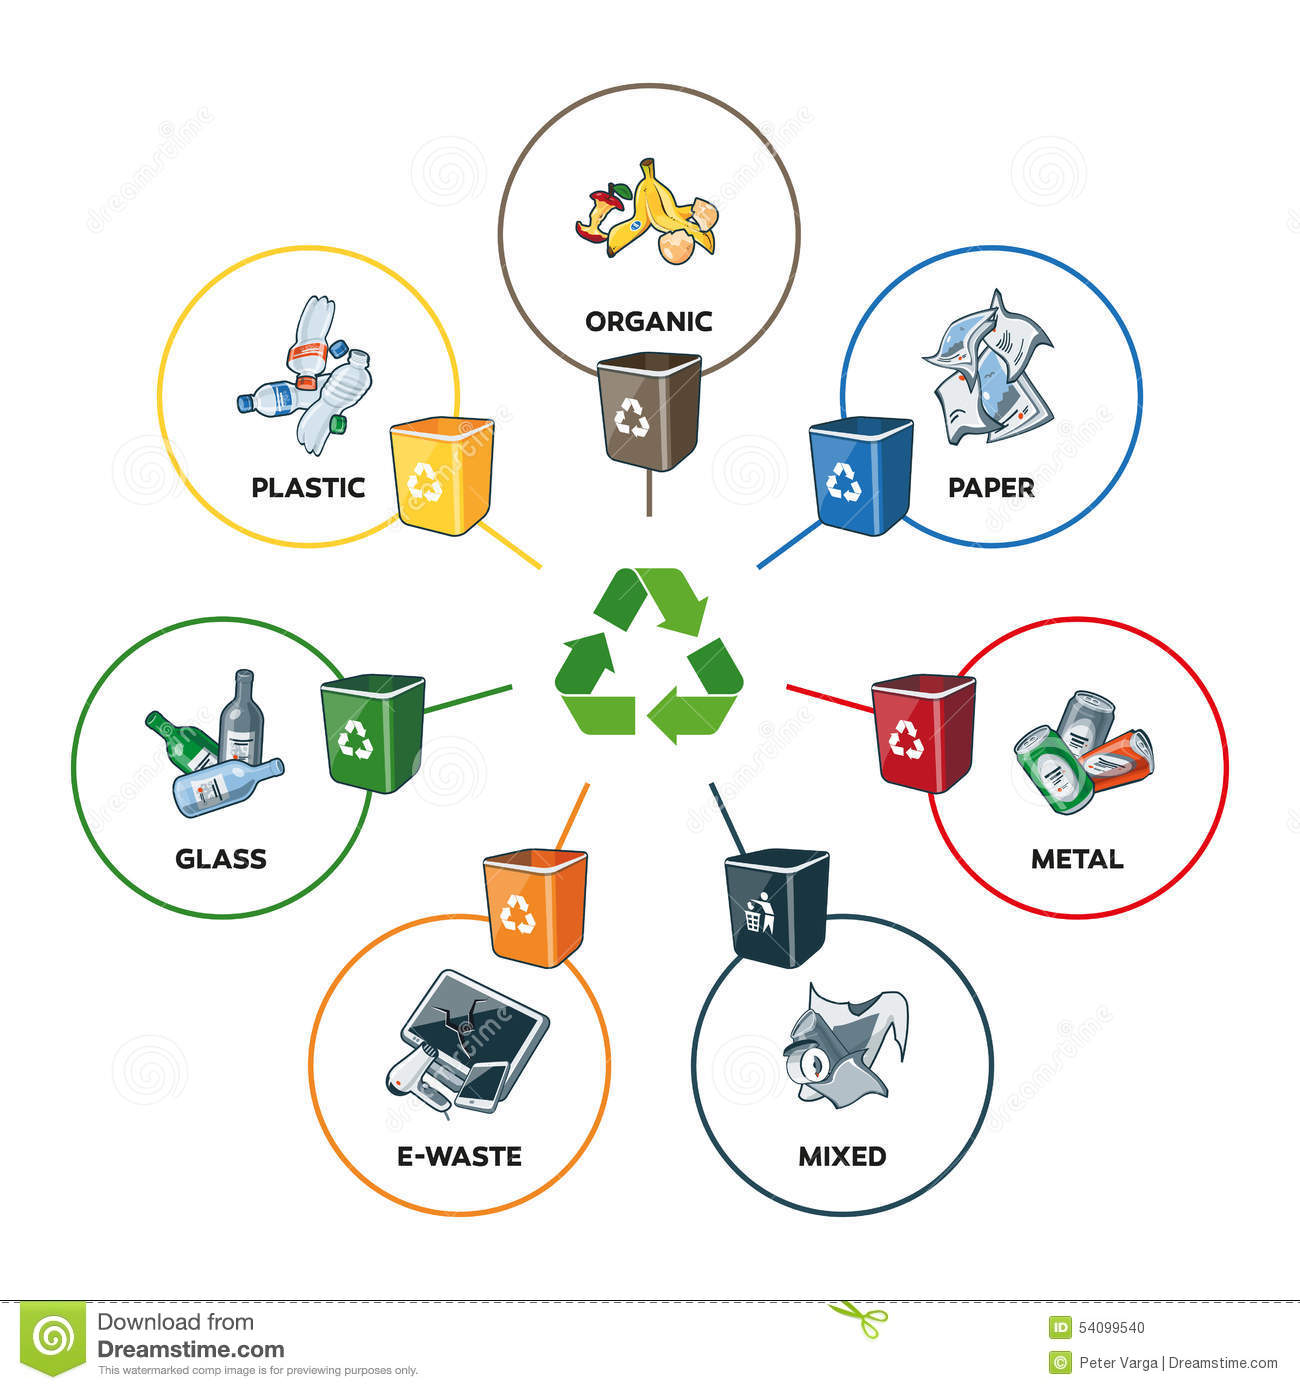 Illustration Of Trash Categories With Organic Paper Plastic Glass